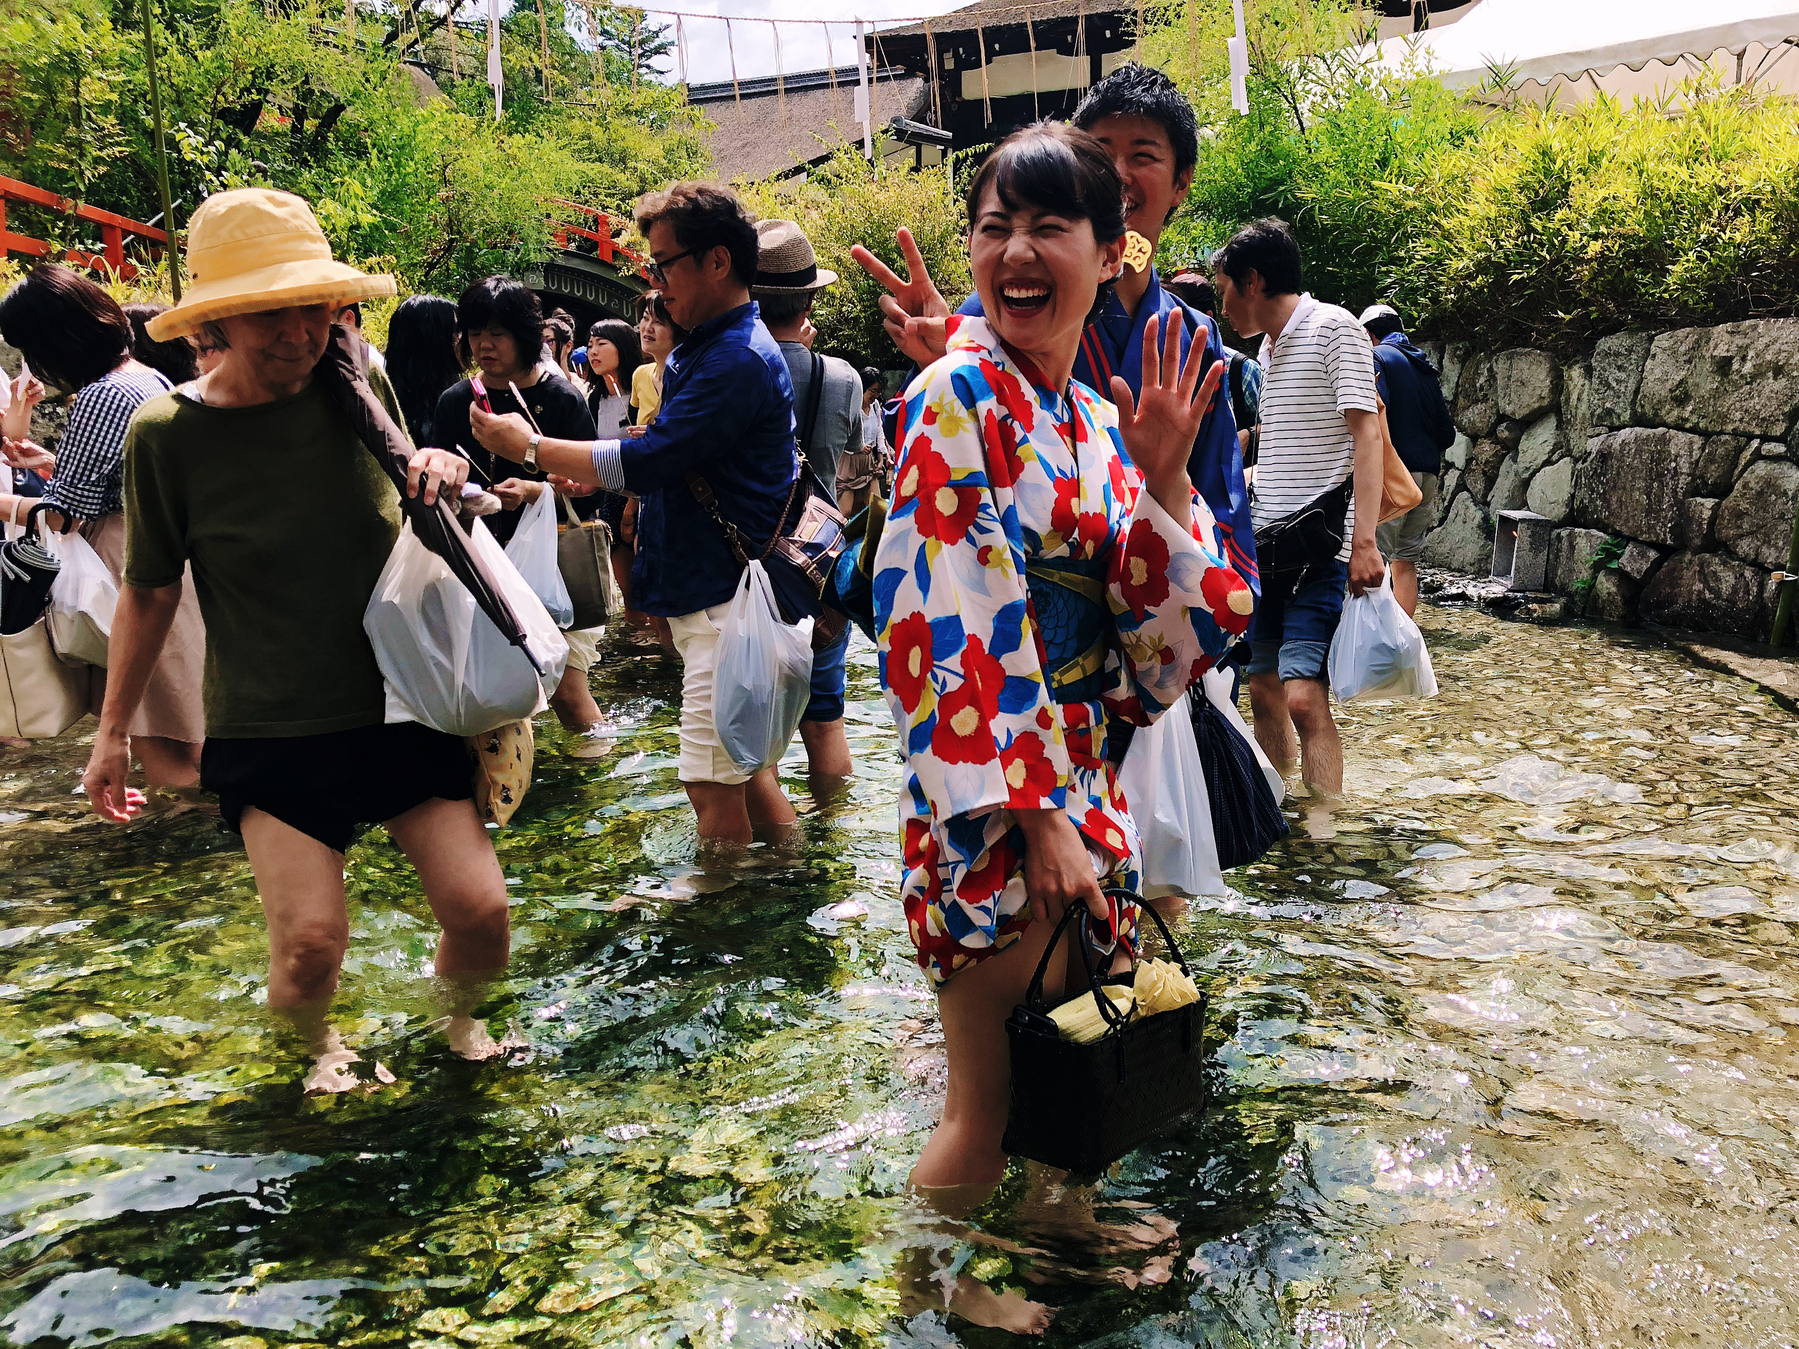 Festival goers on a temple, walking in a cold stream of water, happy.